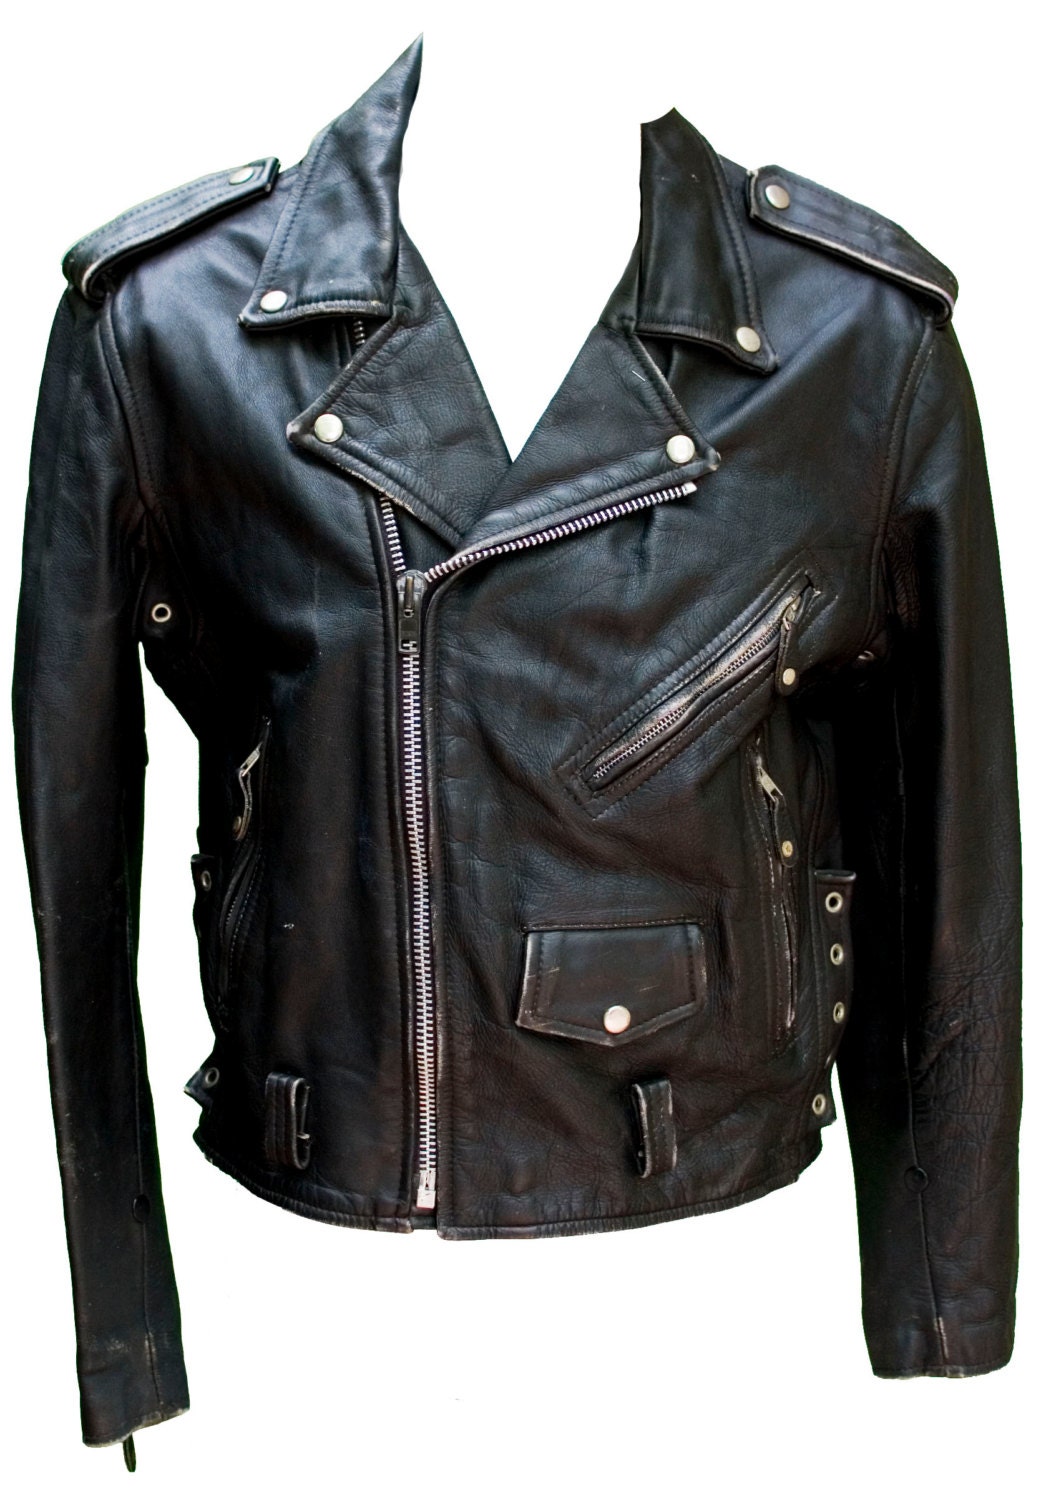 1980s Large Motorcycle Jacket Mens Black Leather by TopangaHiddenT